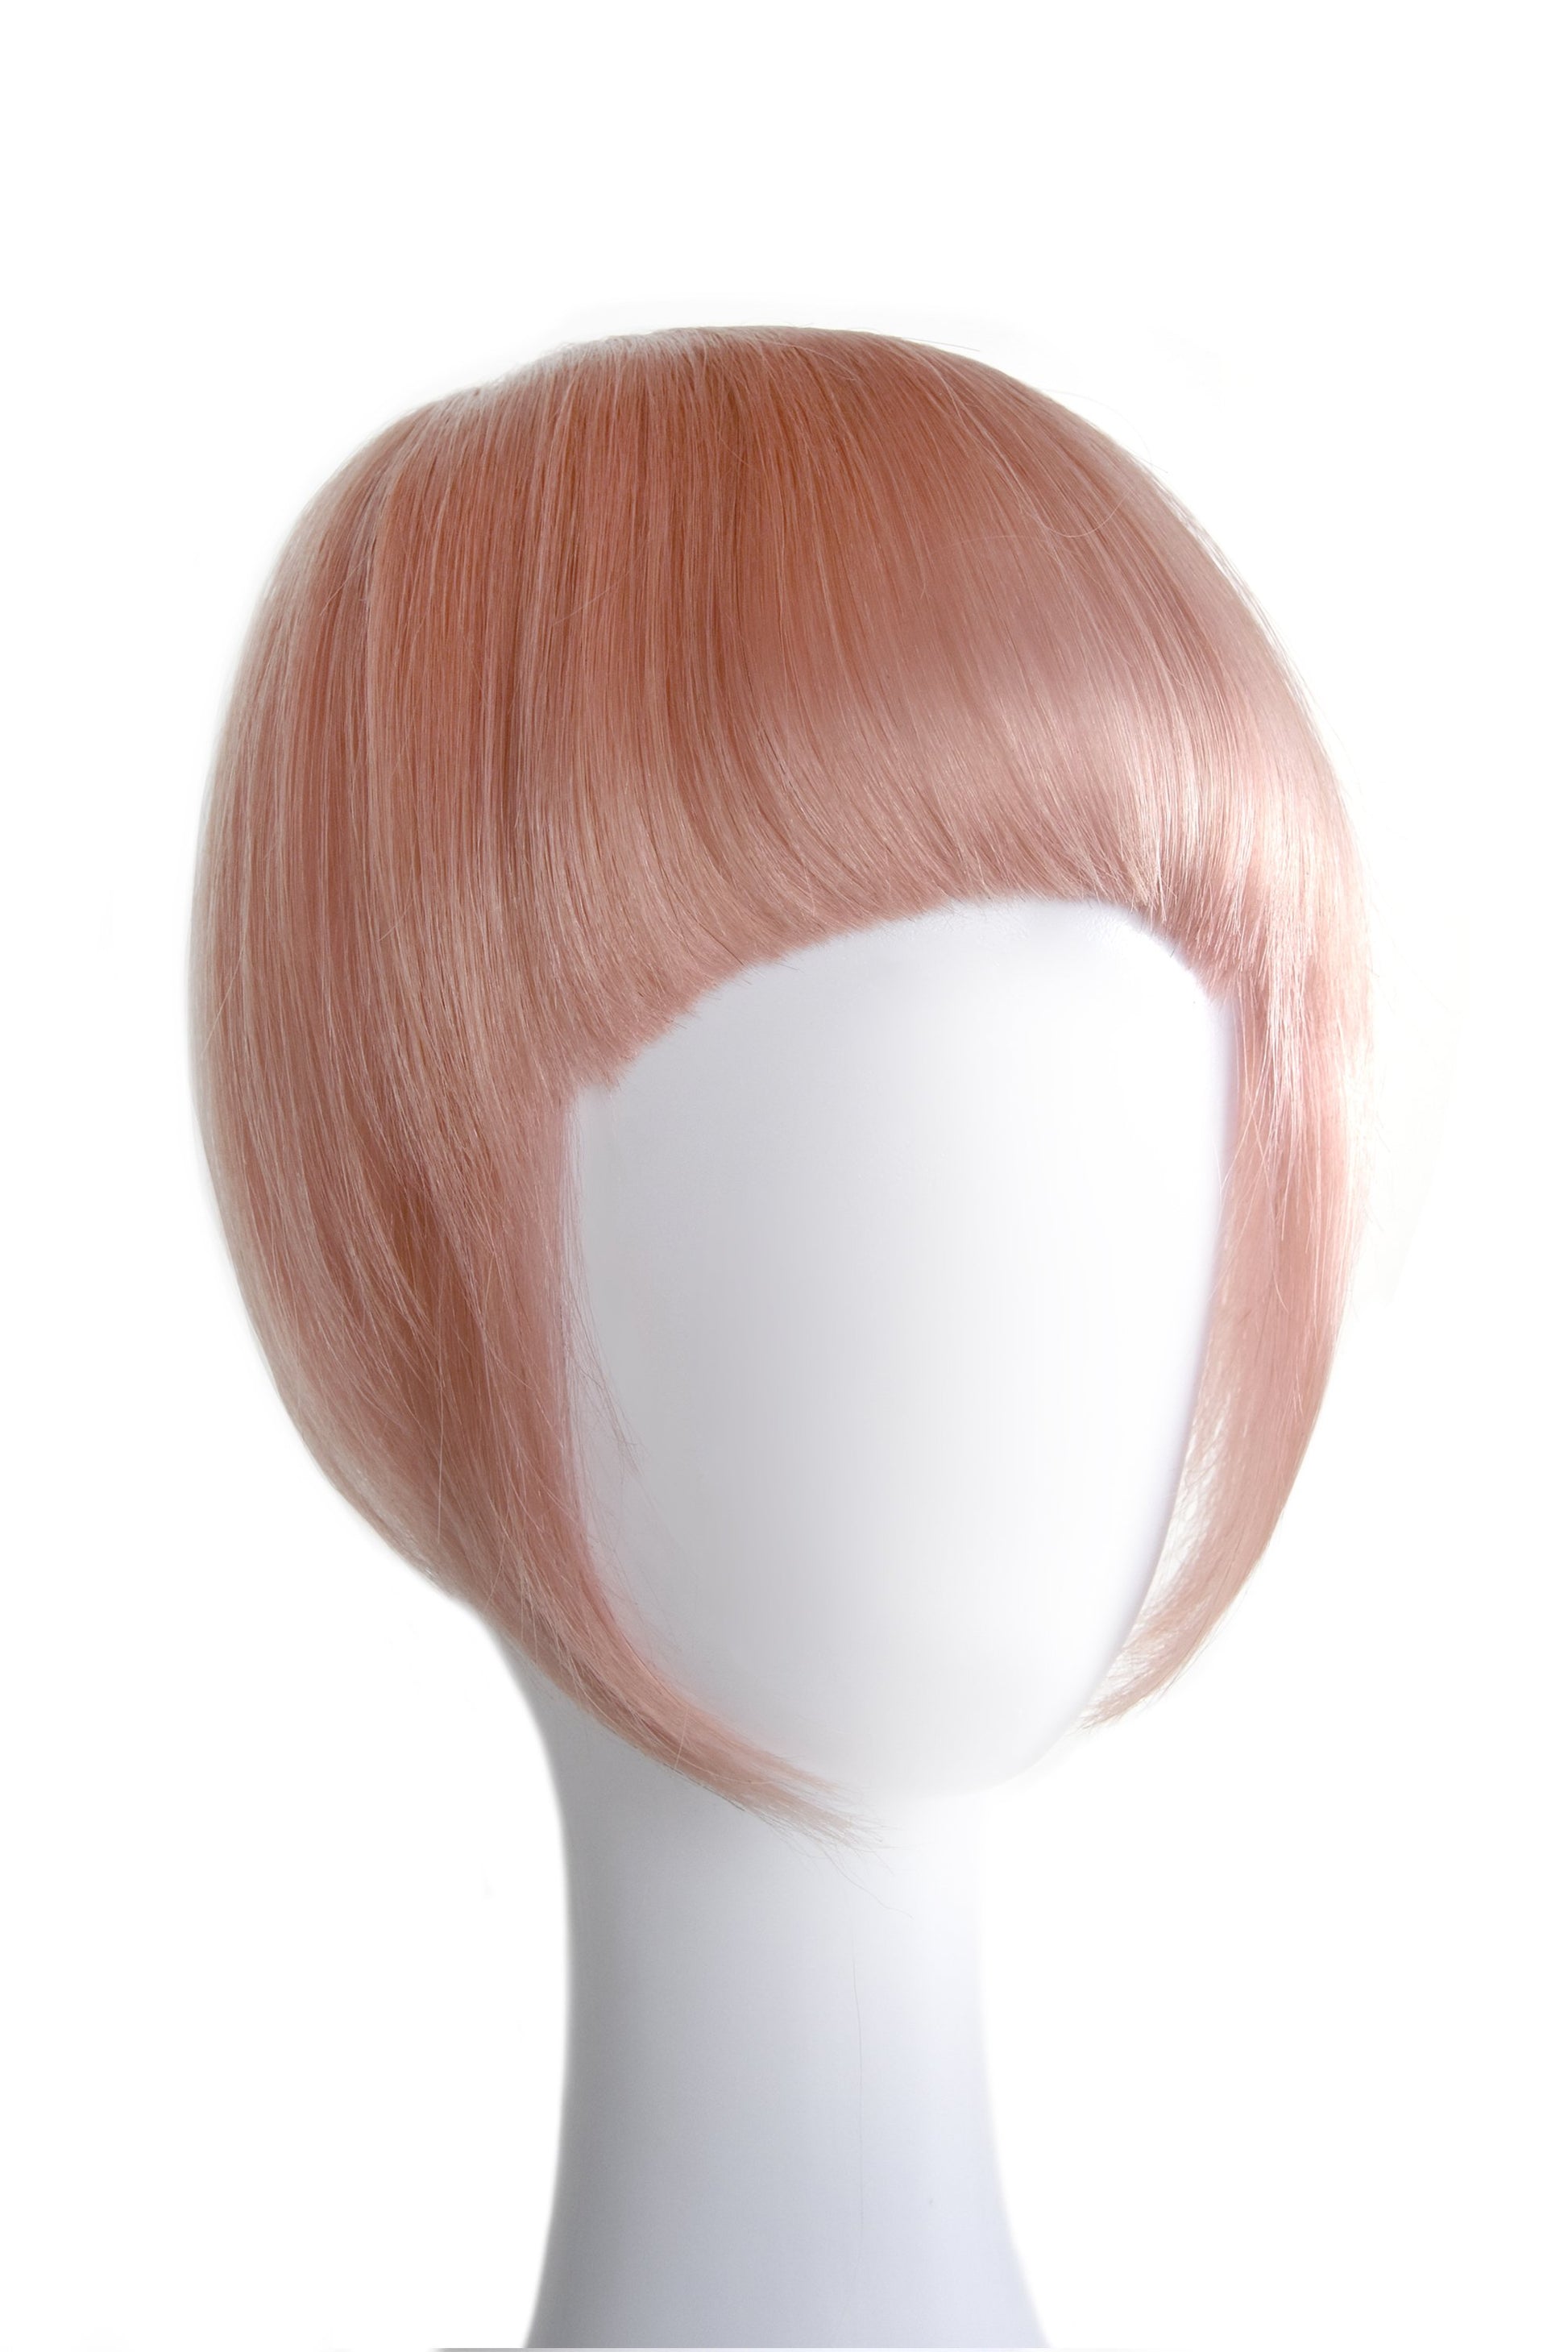 clip in fringe by cliphair™ uk | human hair extensions